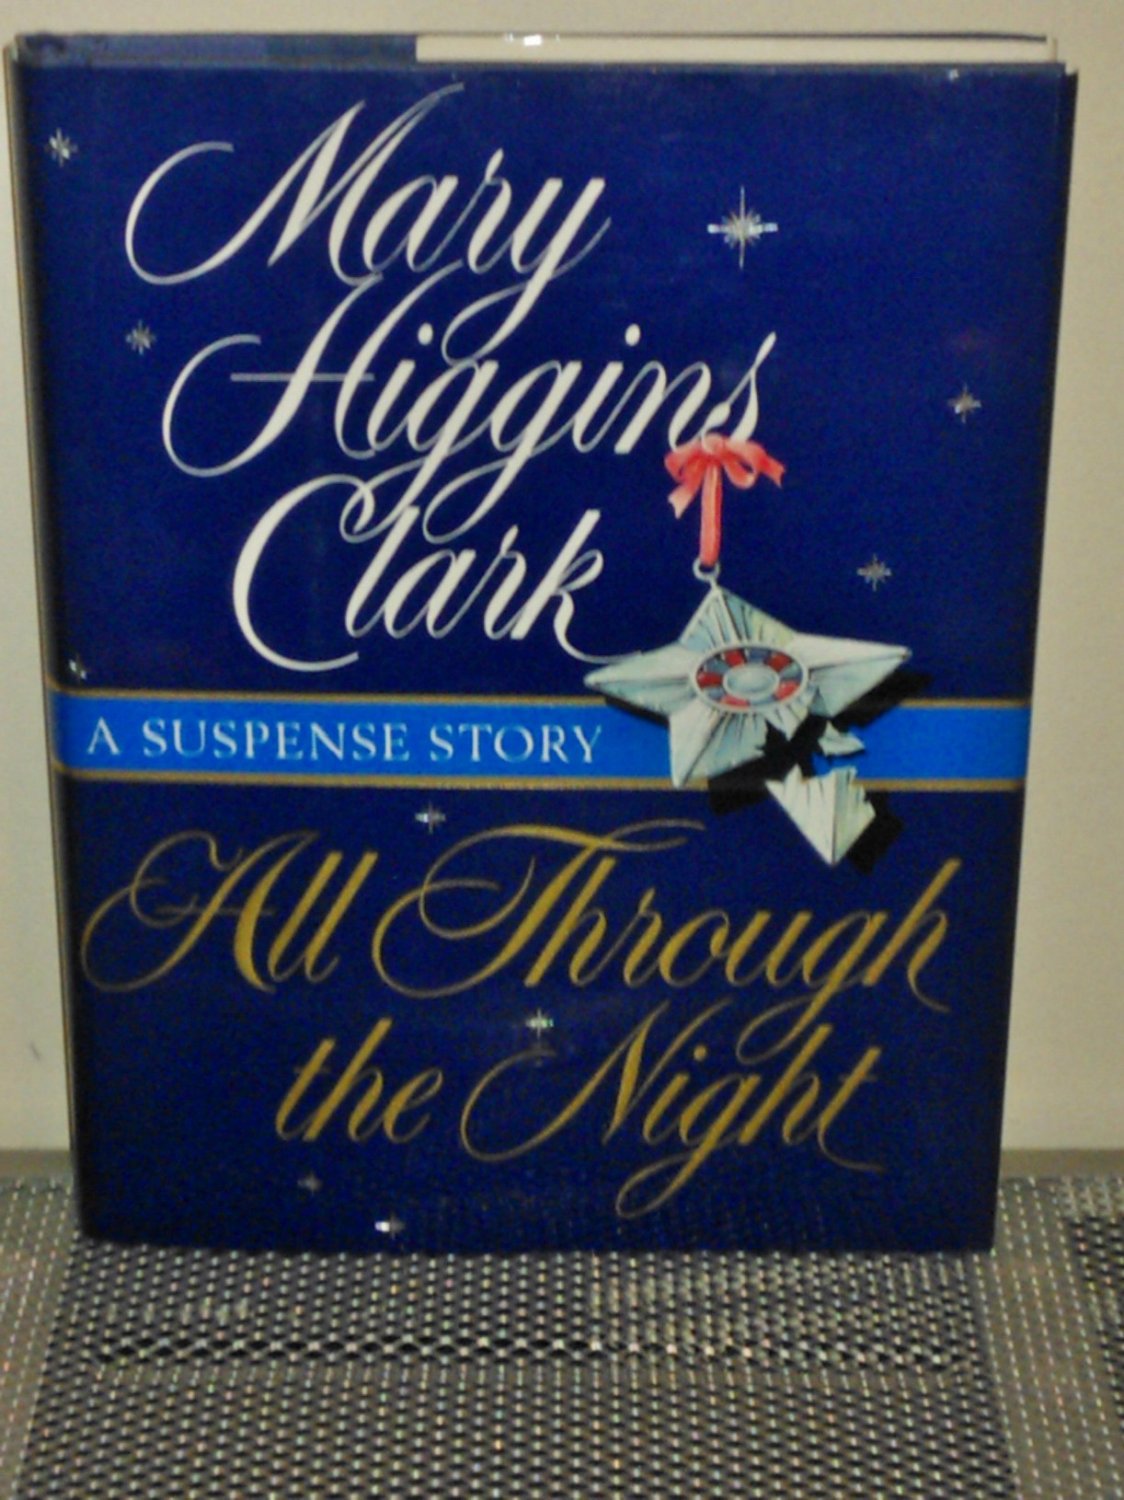 All Through the Night by Mary Clark Higgins (1998 Hardcover)1124 x 1500